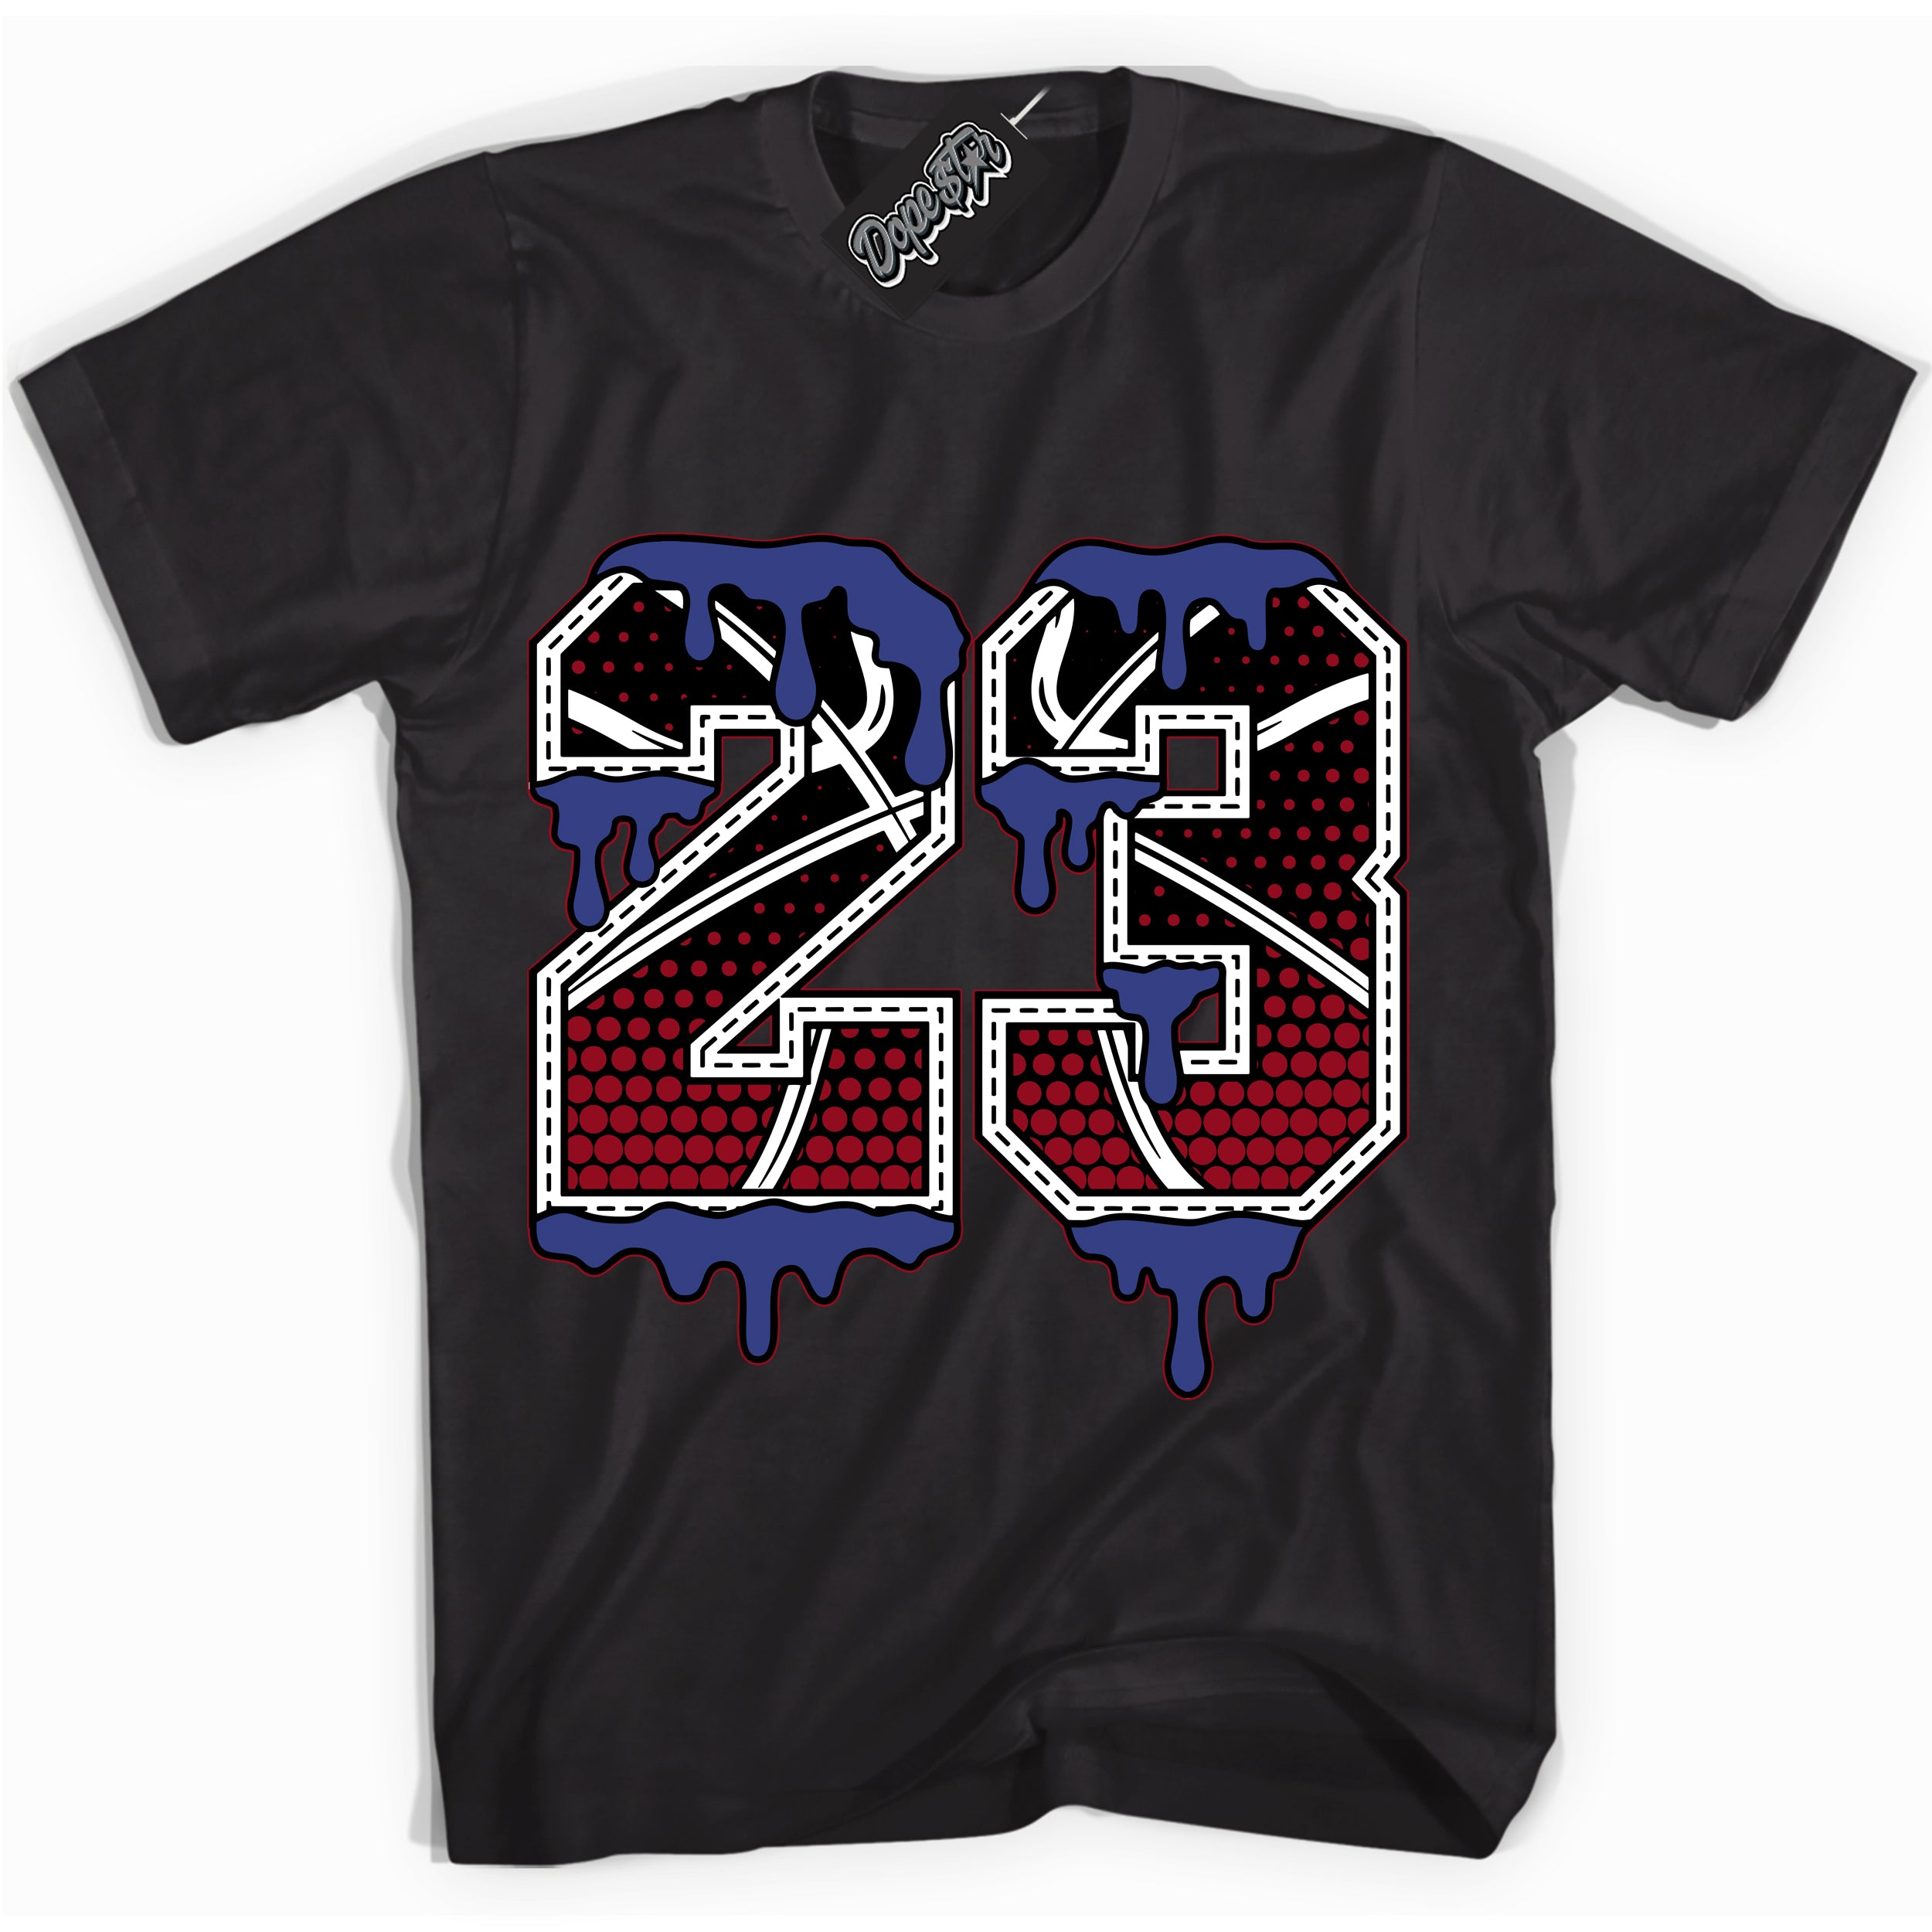 Cool Black Shirt with “ 23 Ball ” design that perfectly matches Playoffs 8s Sneakers.